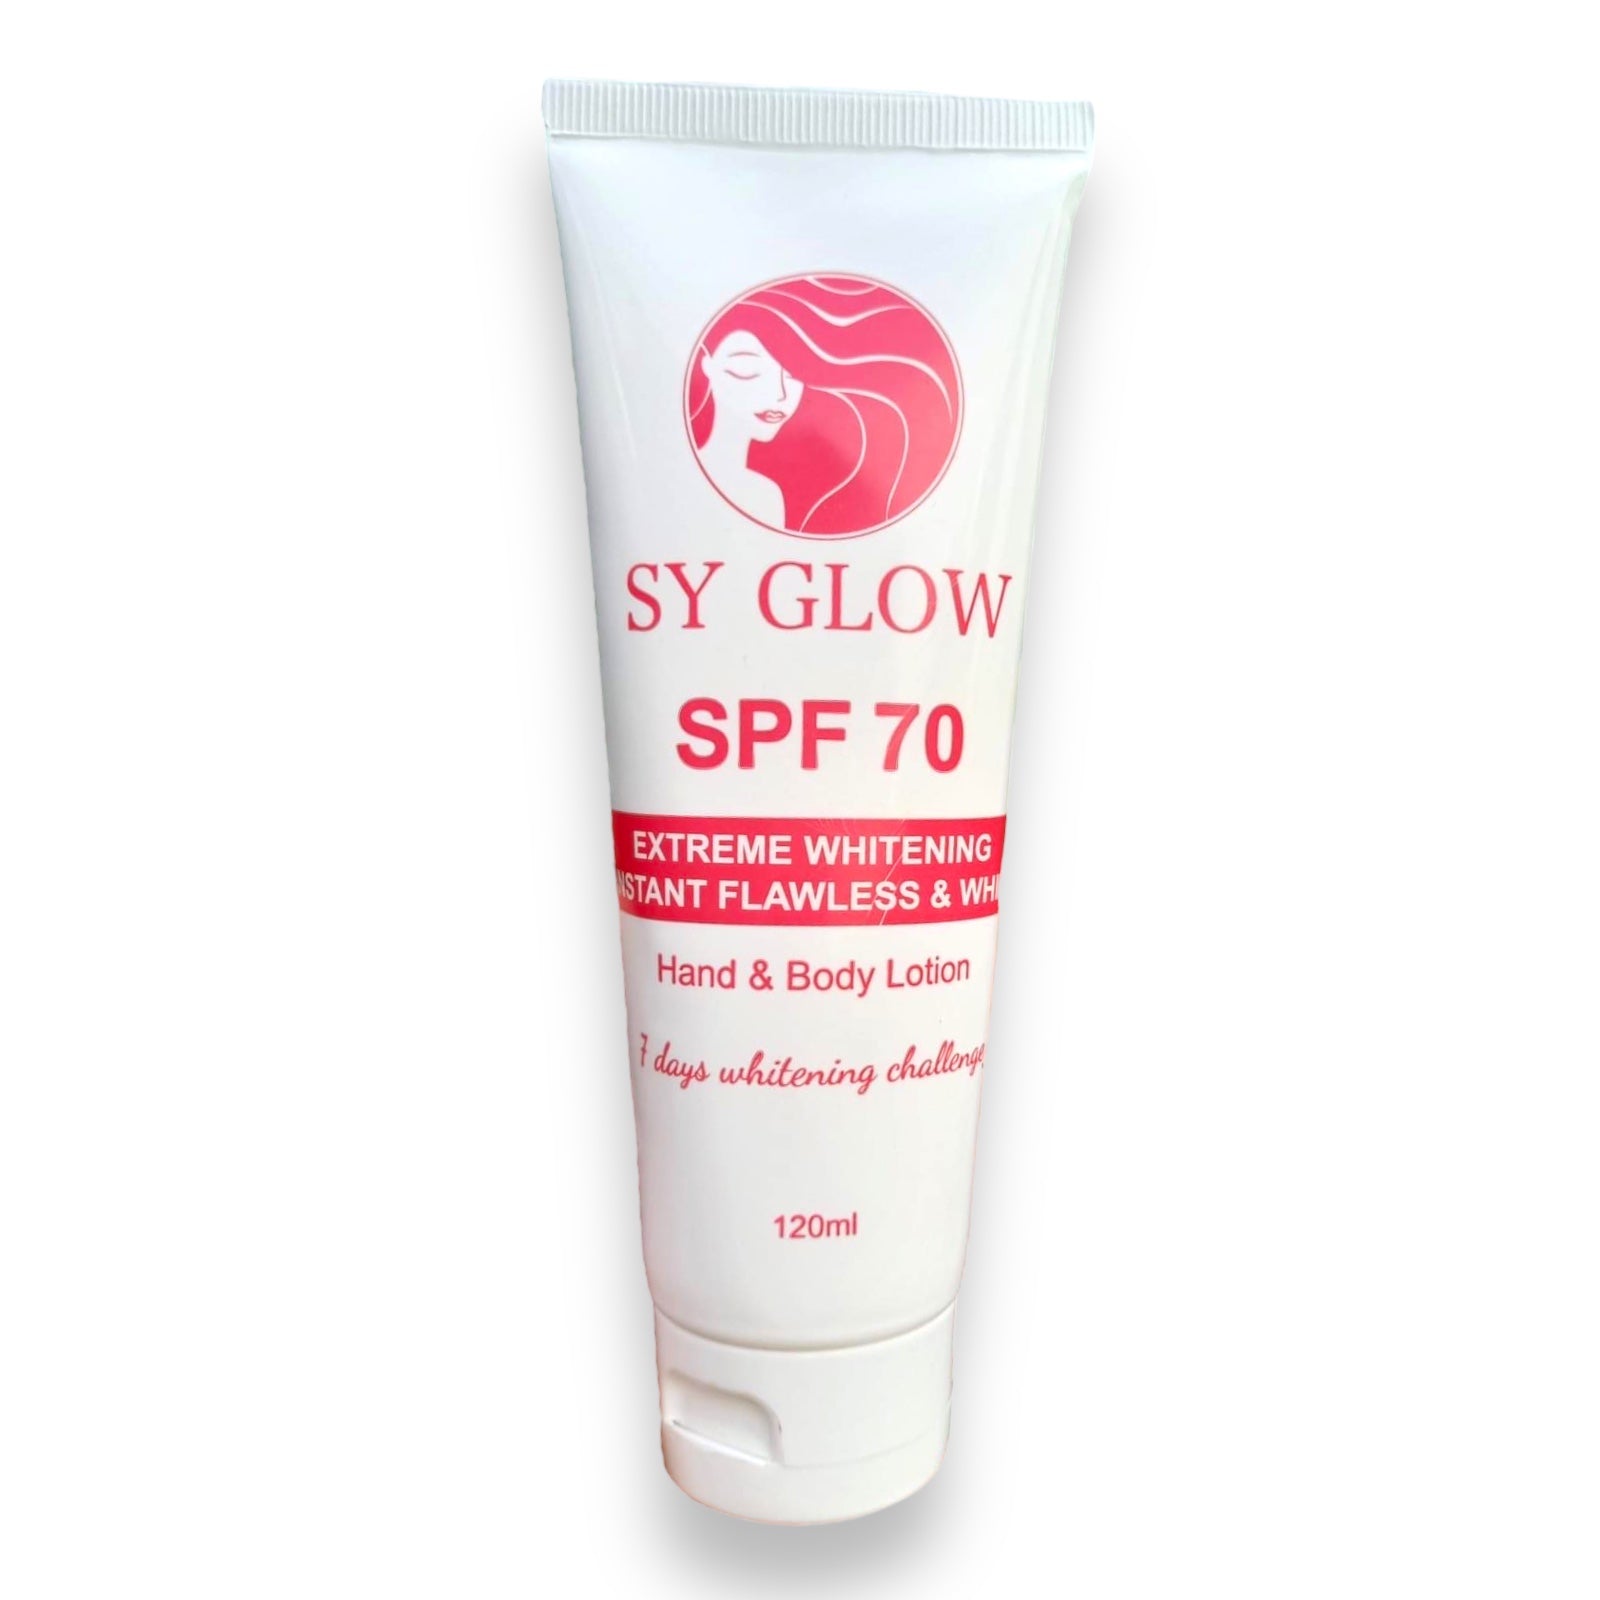 SY GLOW - Extreme Whitening Instant Flawless & White Hand and Body Lotion SPF 70 - 120ml